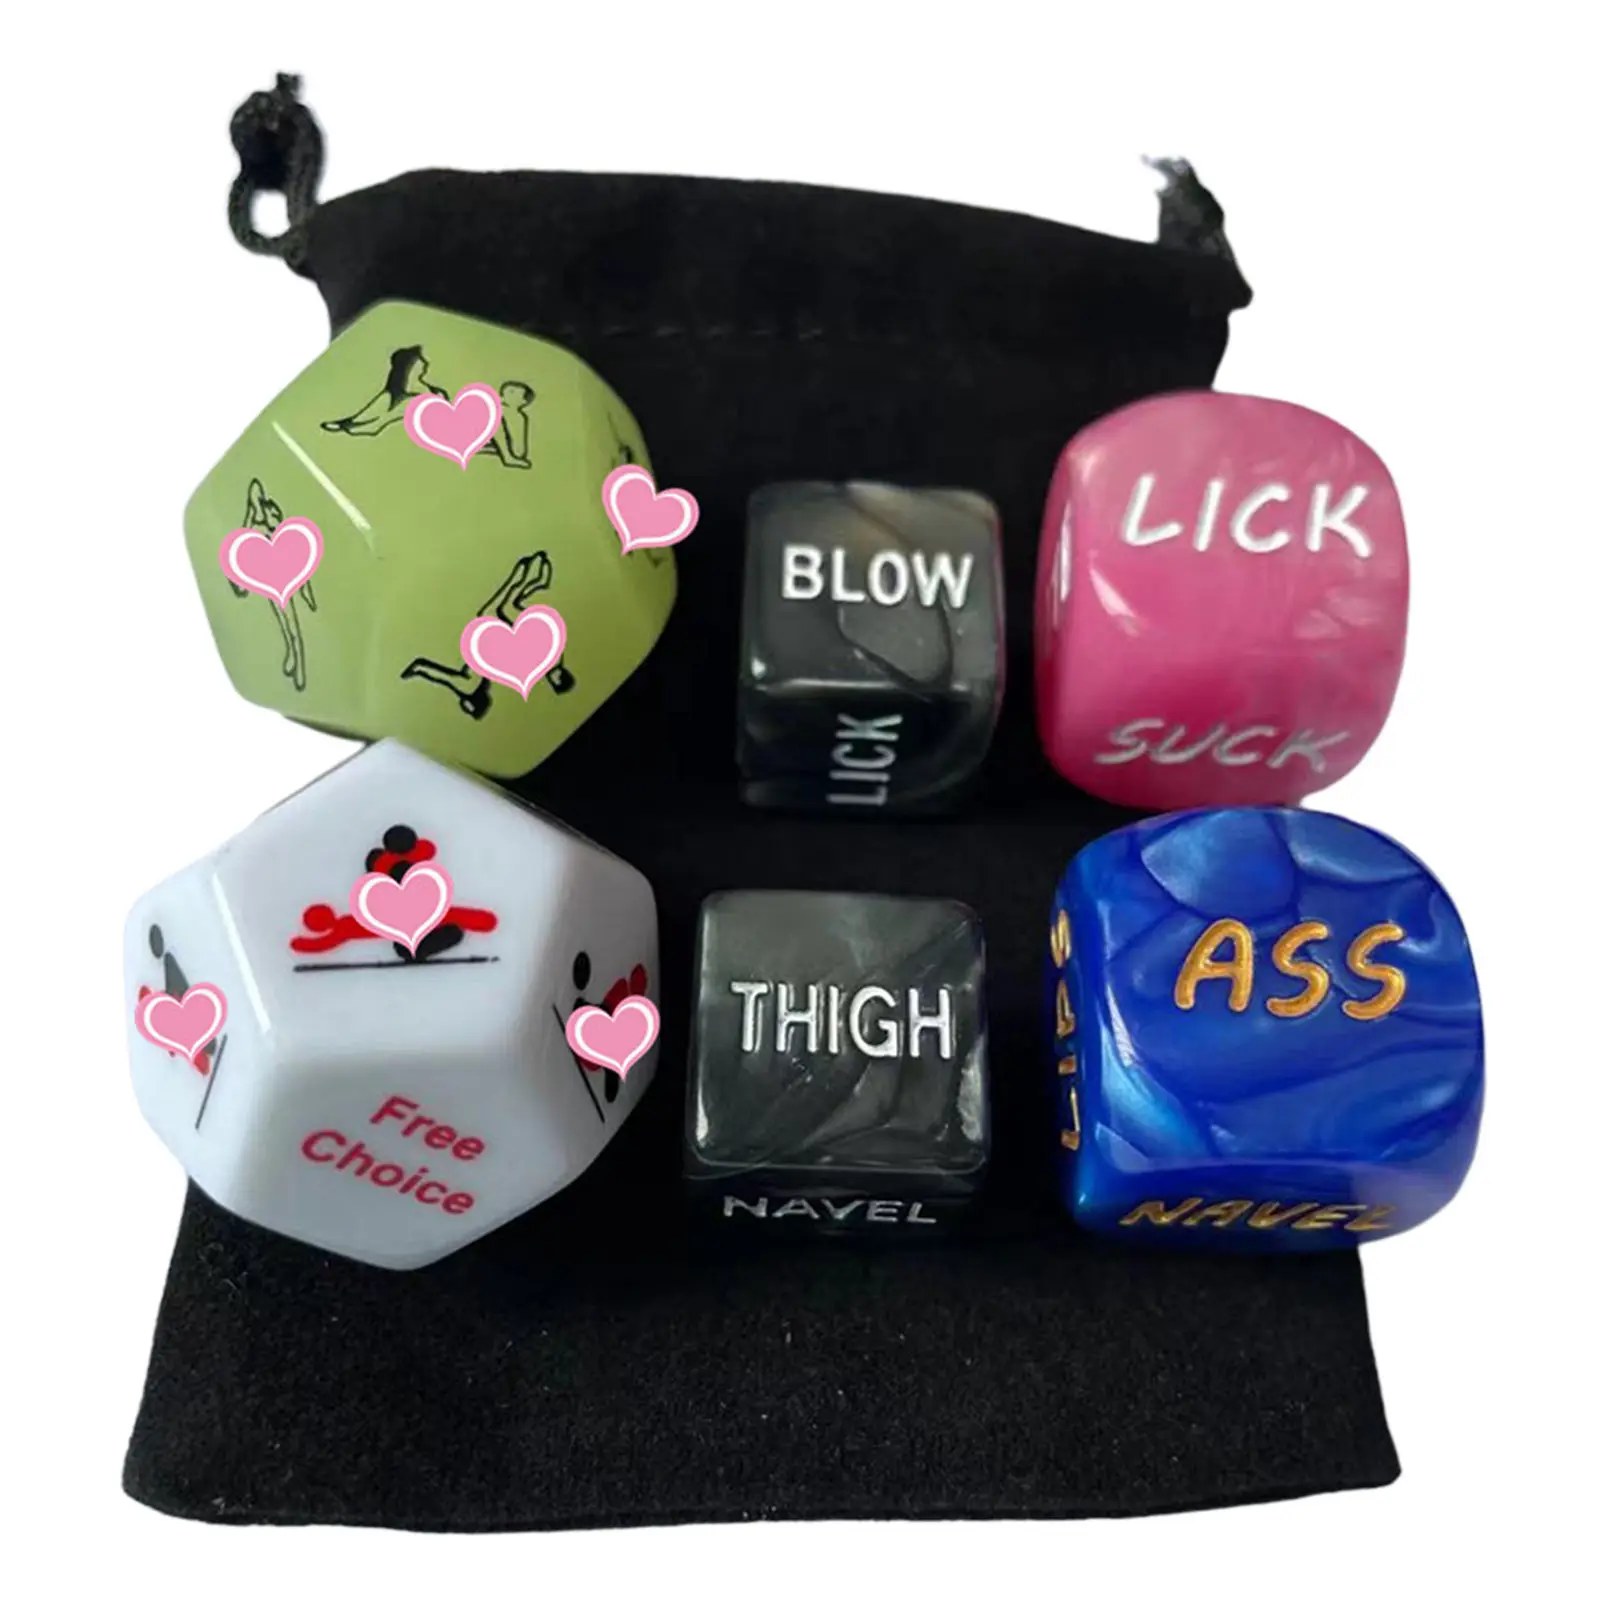 Acrylic Funny Love Dice Erotic Love Fun Adult Funny Posture Toy for Games Bachelor with Cloth Bag